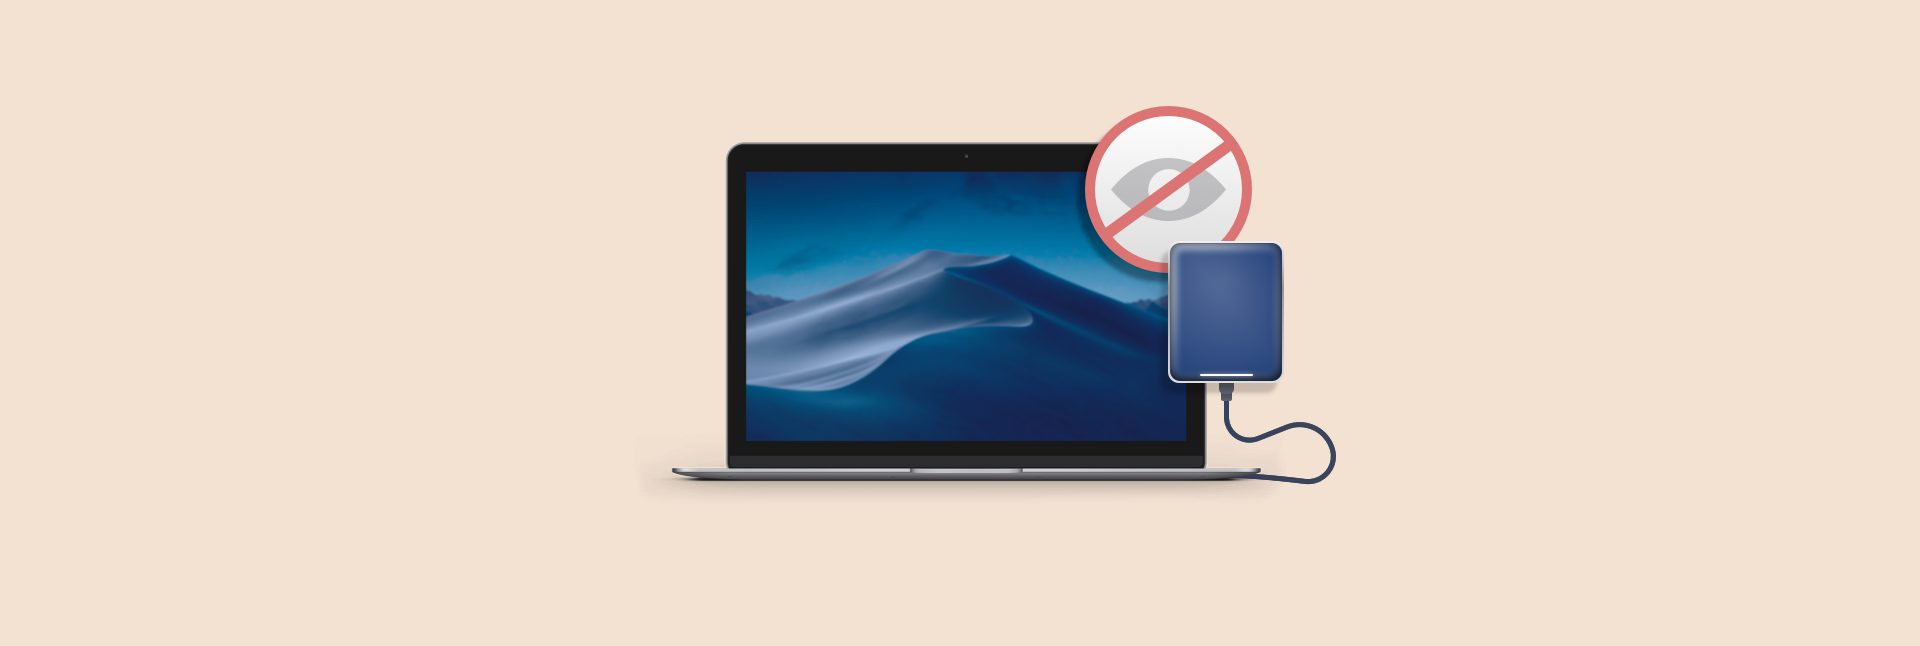 How to Access an External Drive That’s Not Recognized On Mac?